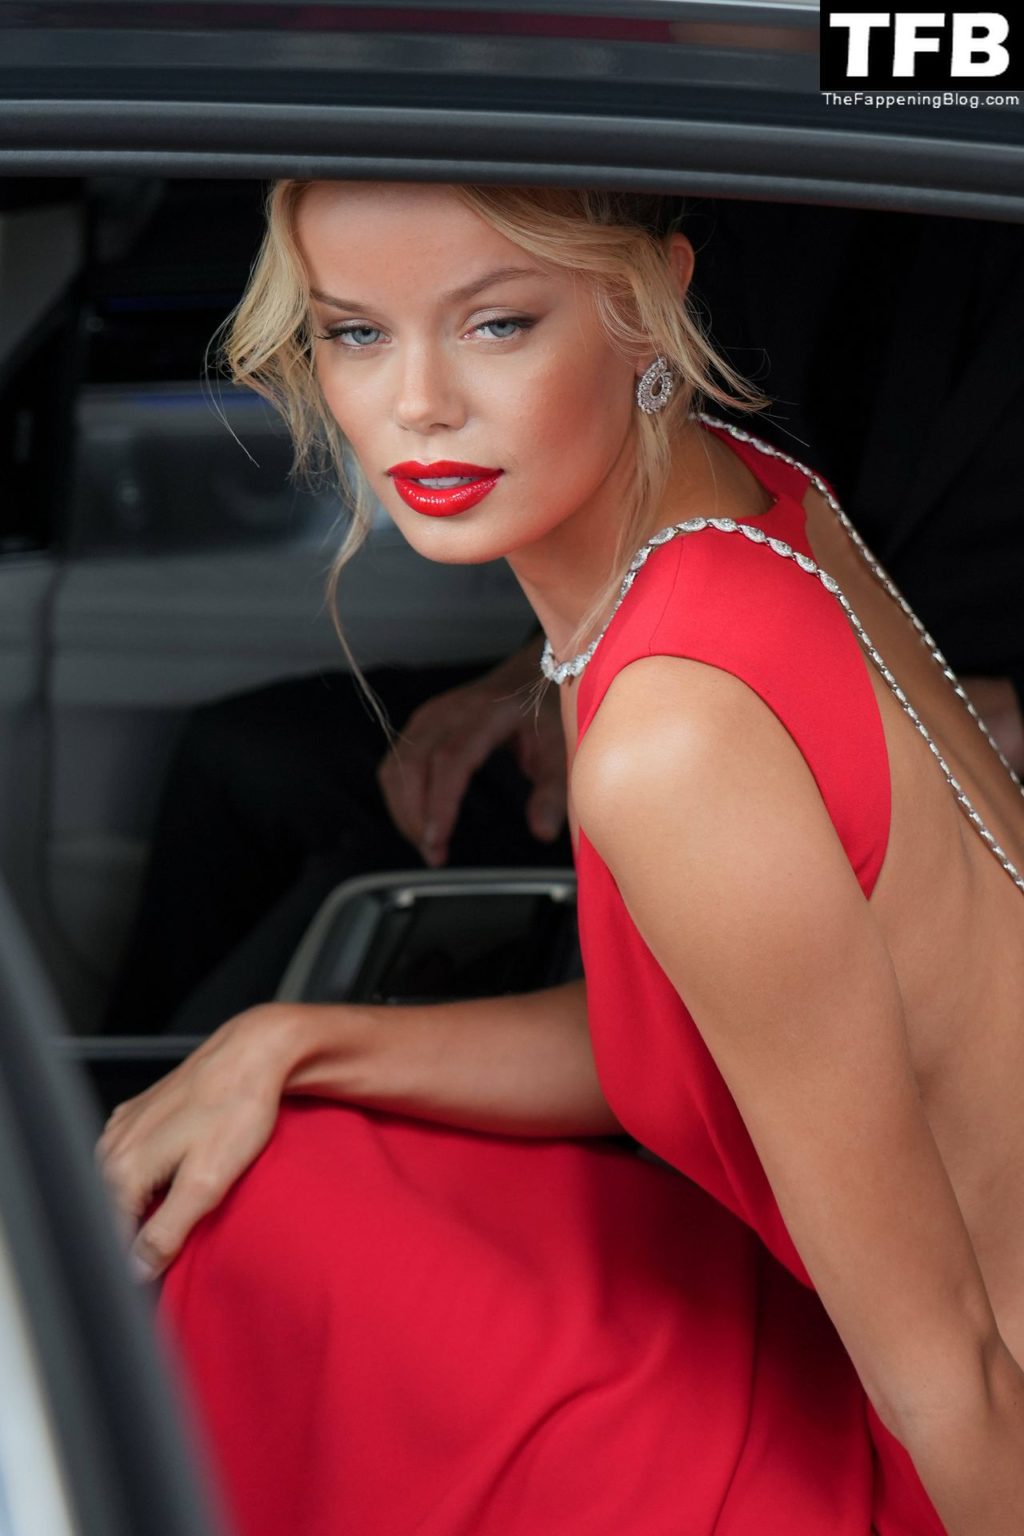 Frida Aasen Sexy The Fappening Blog 150 1024x1536 - Frida Aasen Looks Stunning in a Red Dress at the 75th Annual Cannes Film Festival (153 Photos)